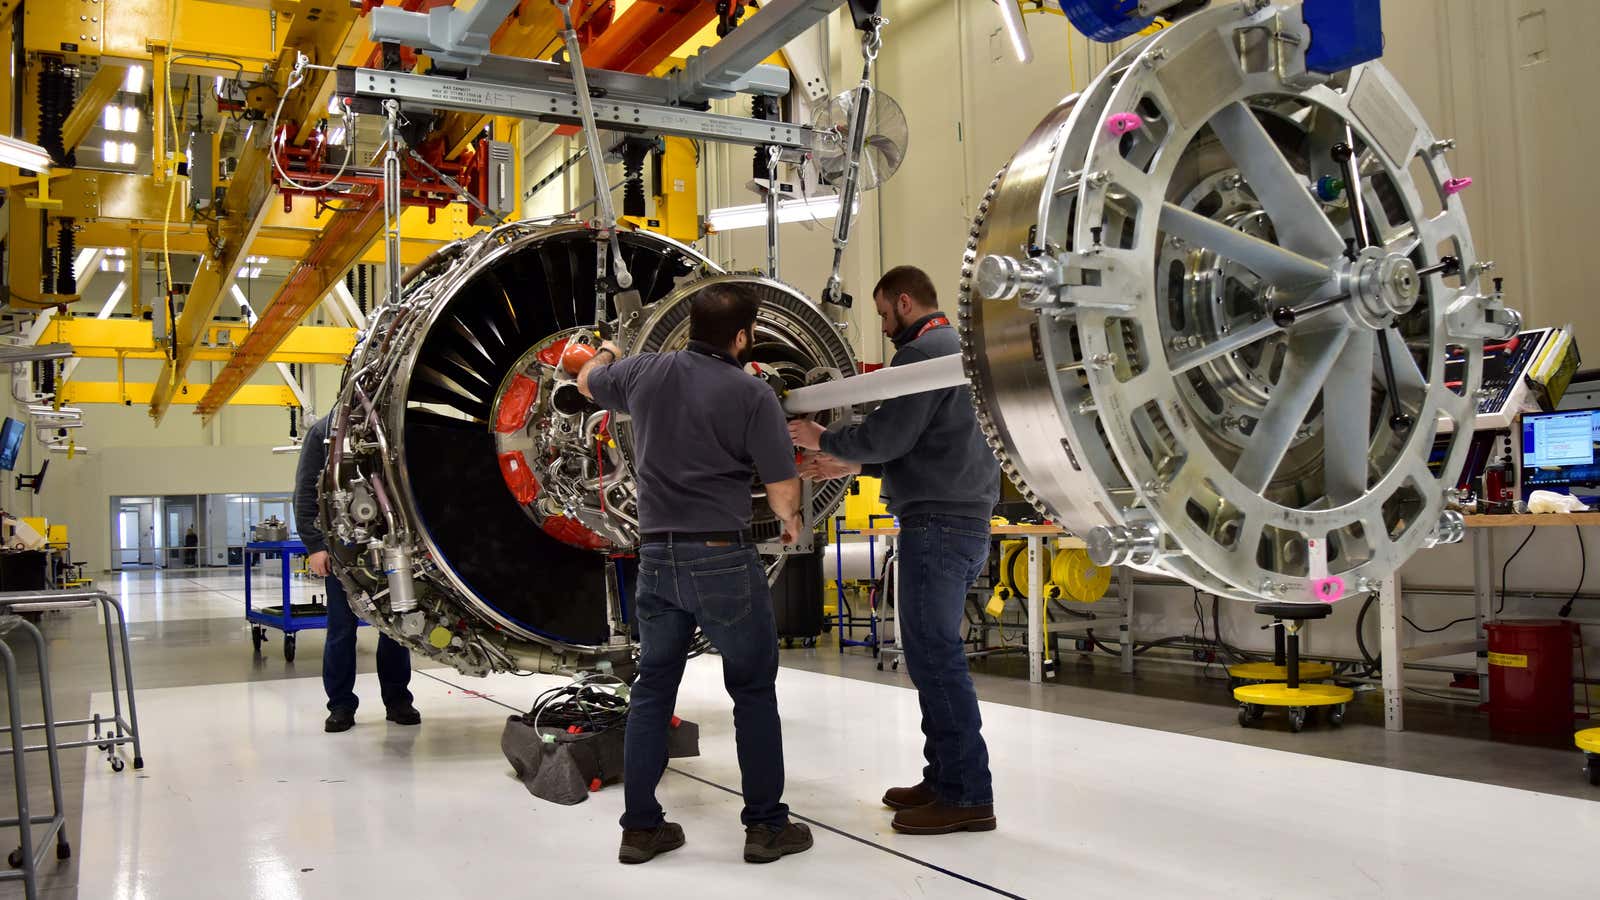 FILE PHOTO: Technicians build LEAP engines for jetliners at a new, highly automated General Electric (GE) factory in Lafayette, Indiana, U.S. on March 29, 2017.…